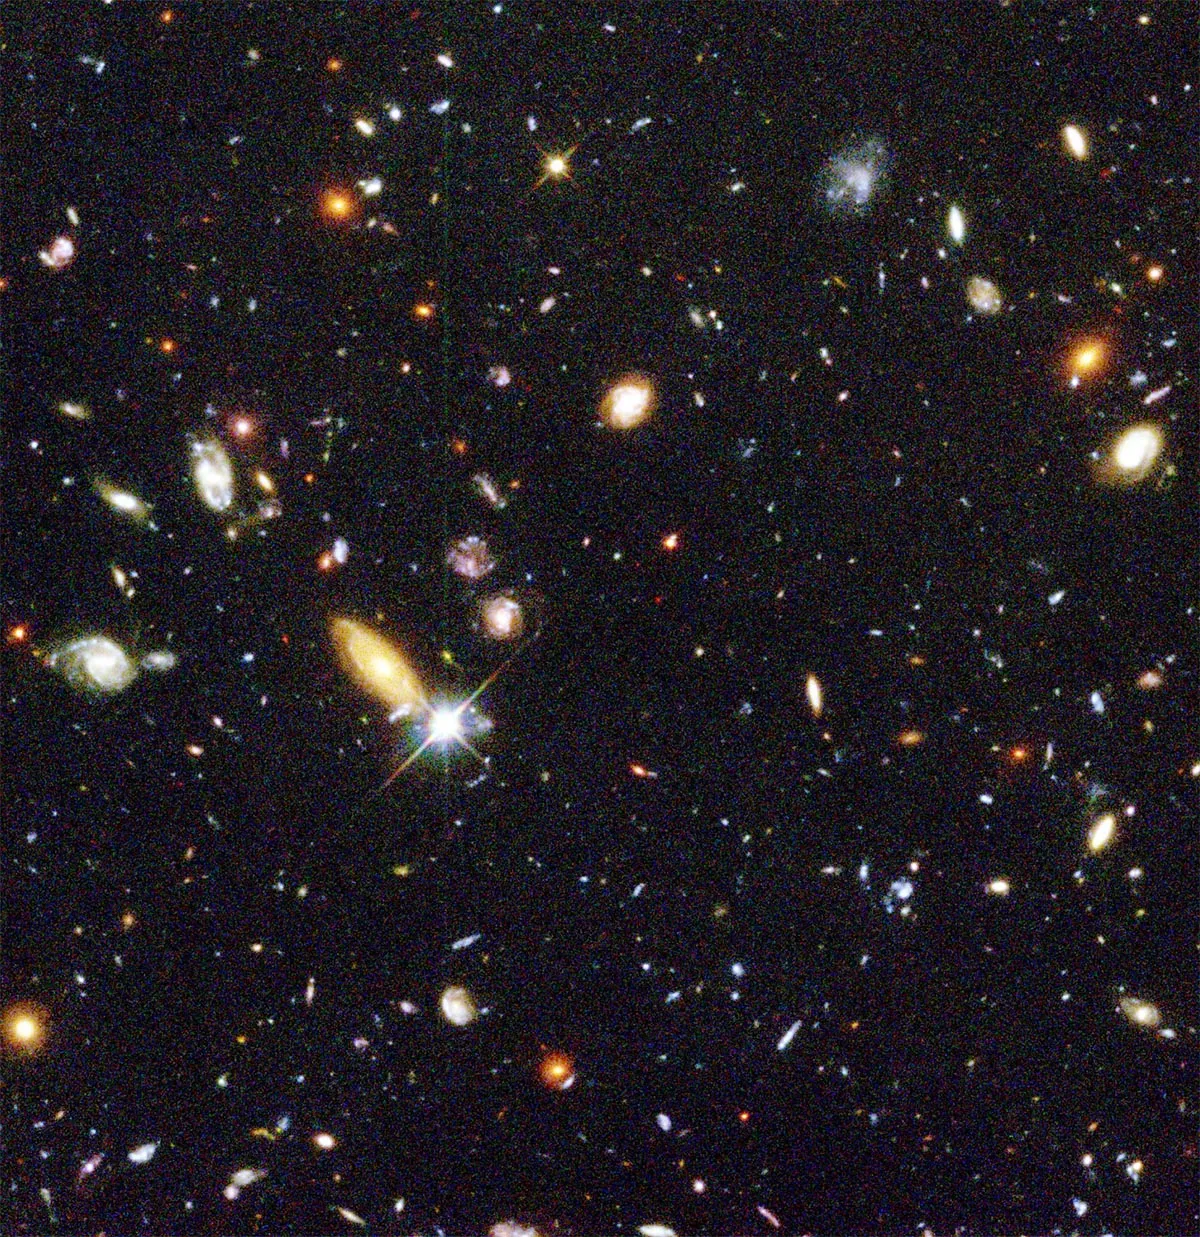 The Universe is a laboratory for studying experiments in particle physics. Credit: Robert Williams and the Hubble Deep Field Team (STScI)